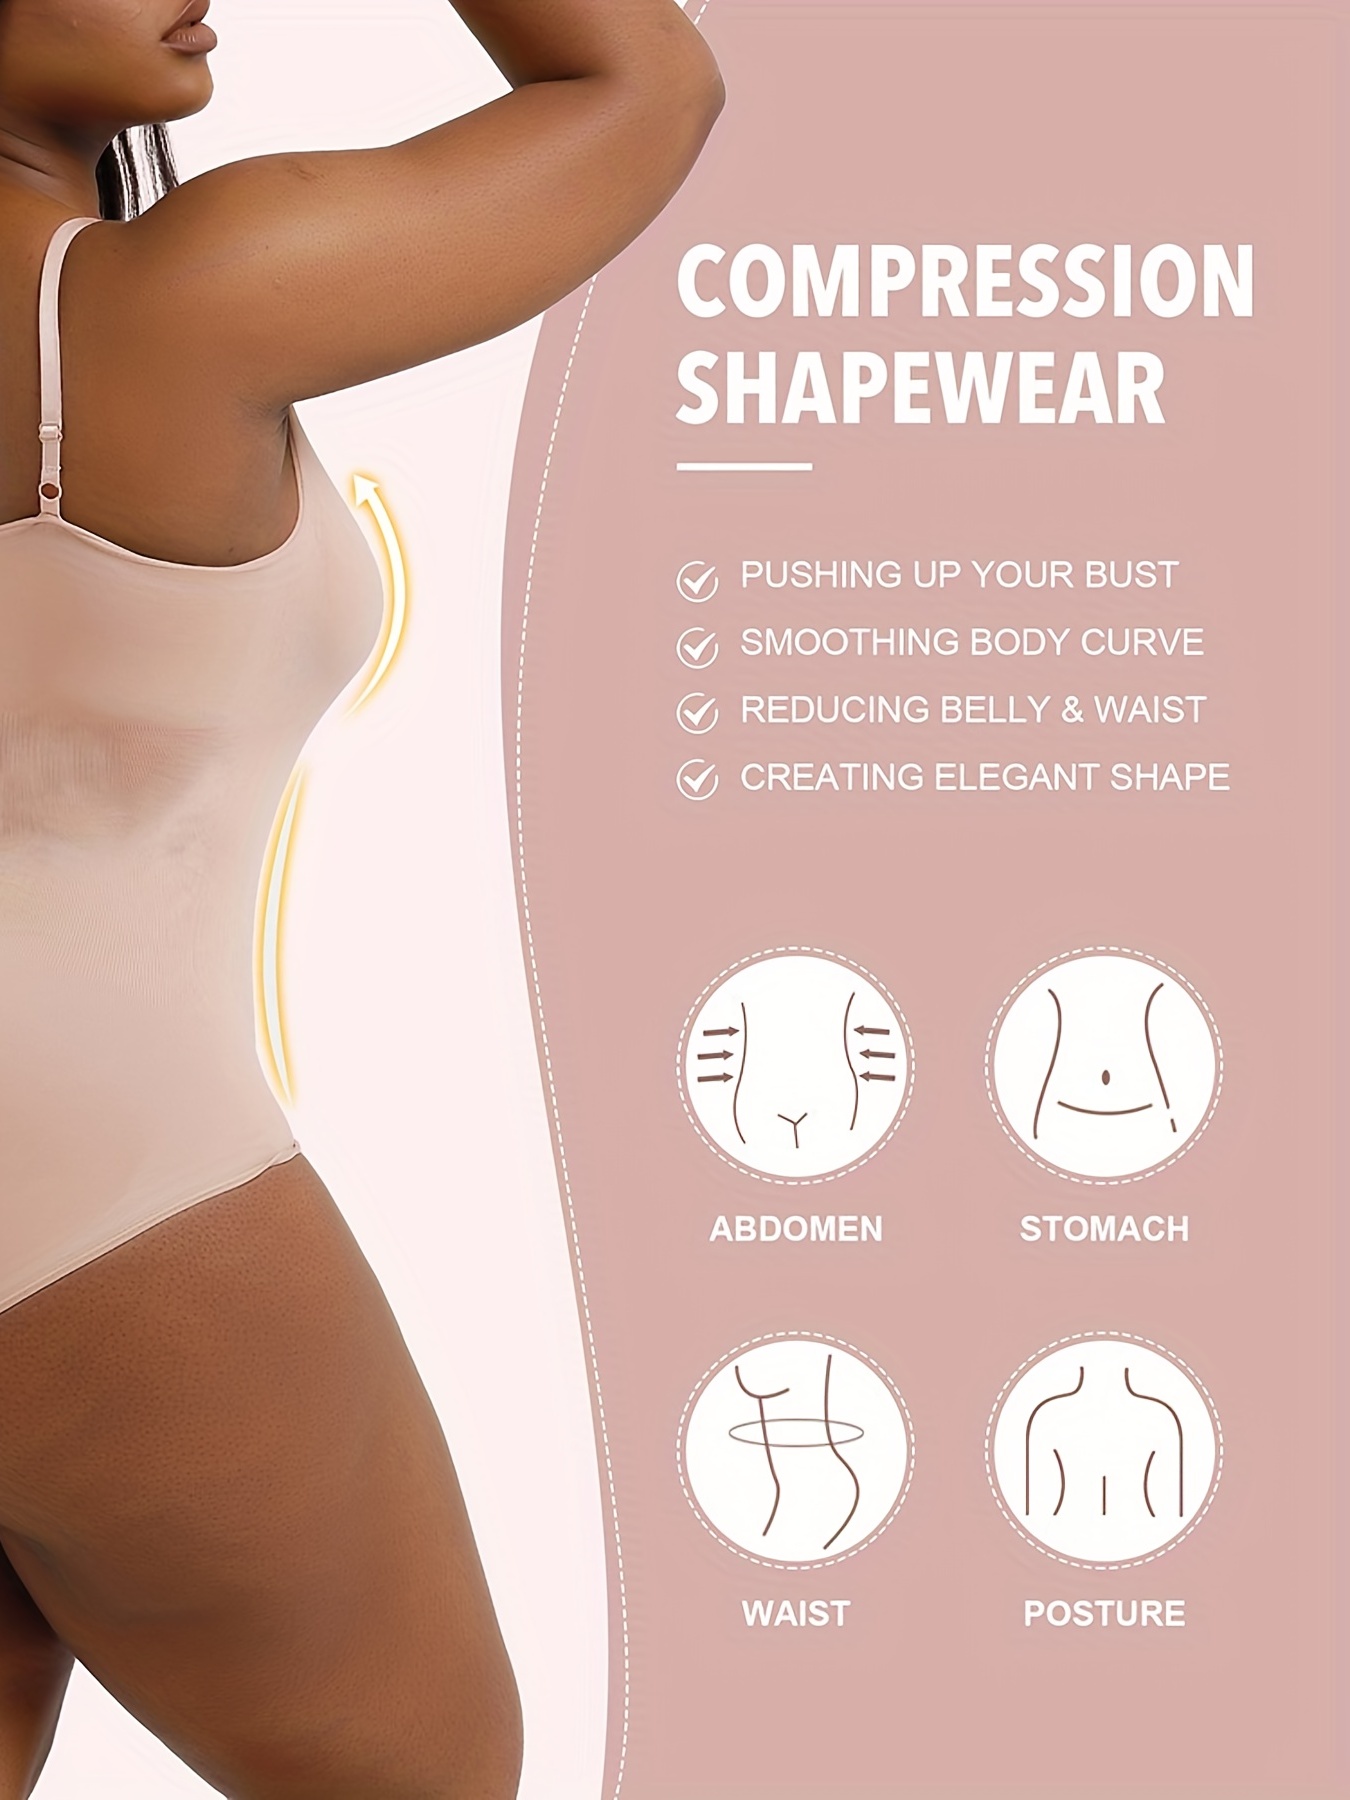 TZsecrets Women Full Body Shaper Cotton Spandex Blend Body Shaper wear for  Thighs, Back, Tummy - Stretchable Tummy Control with Full Body Shaping and  Slimming (Beige)